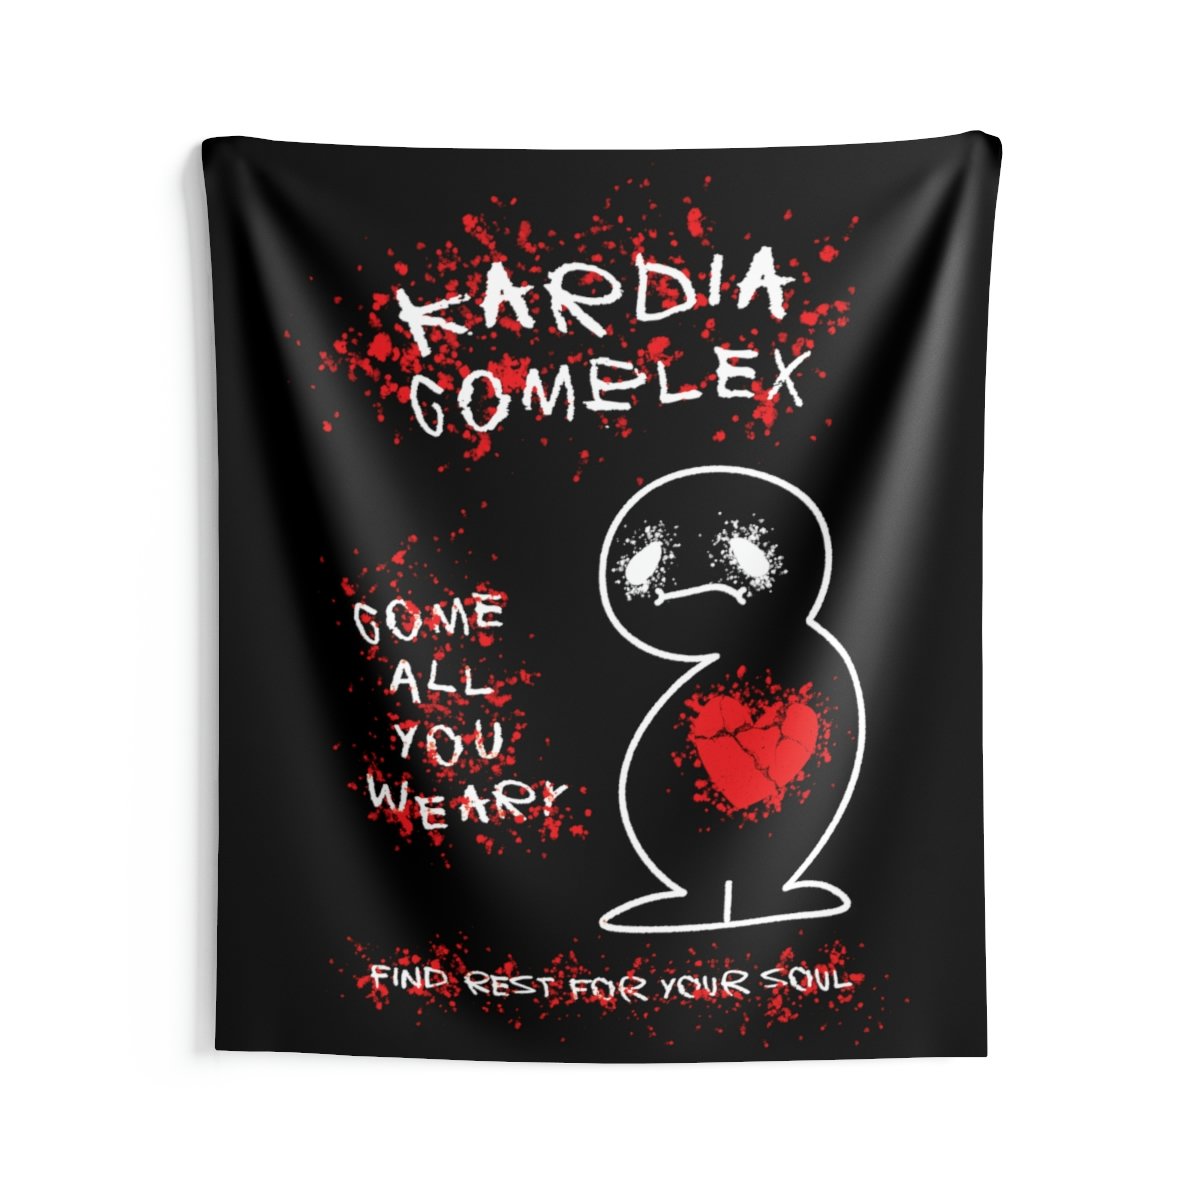 Kardia Complex – Come All You Weary Indoor Wall Tapestries